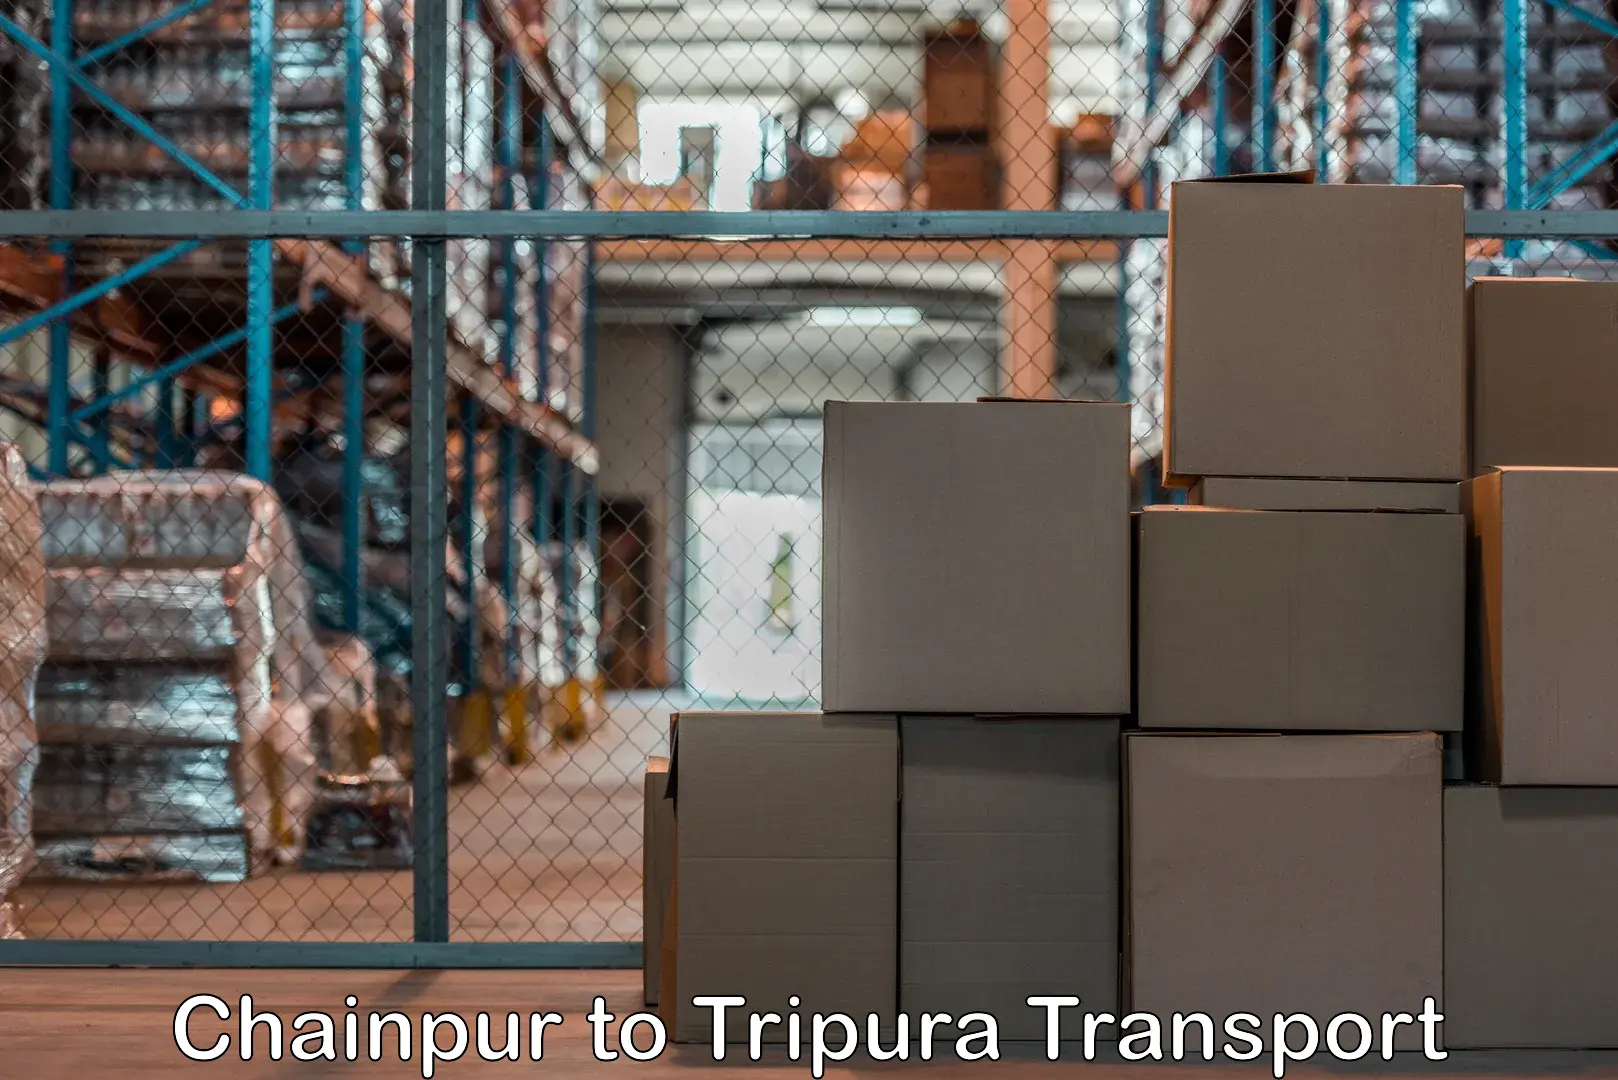 Daily transport service Chainpur to Tripura